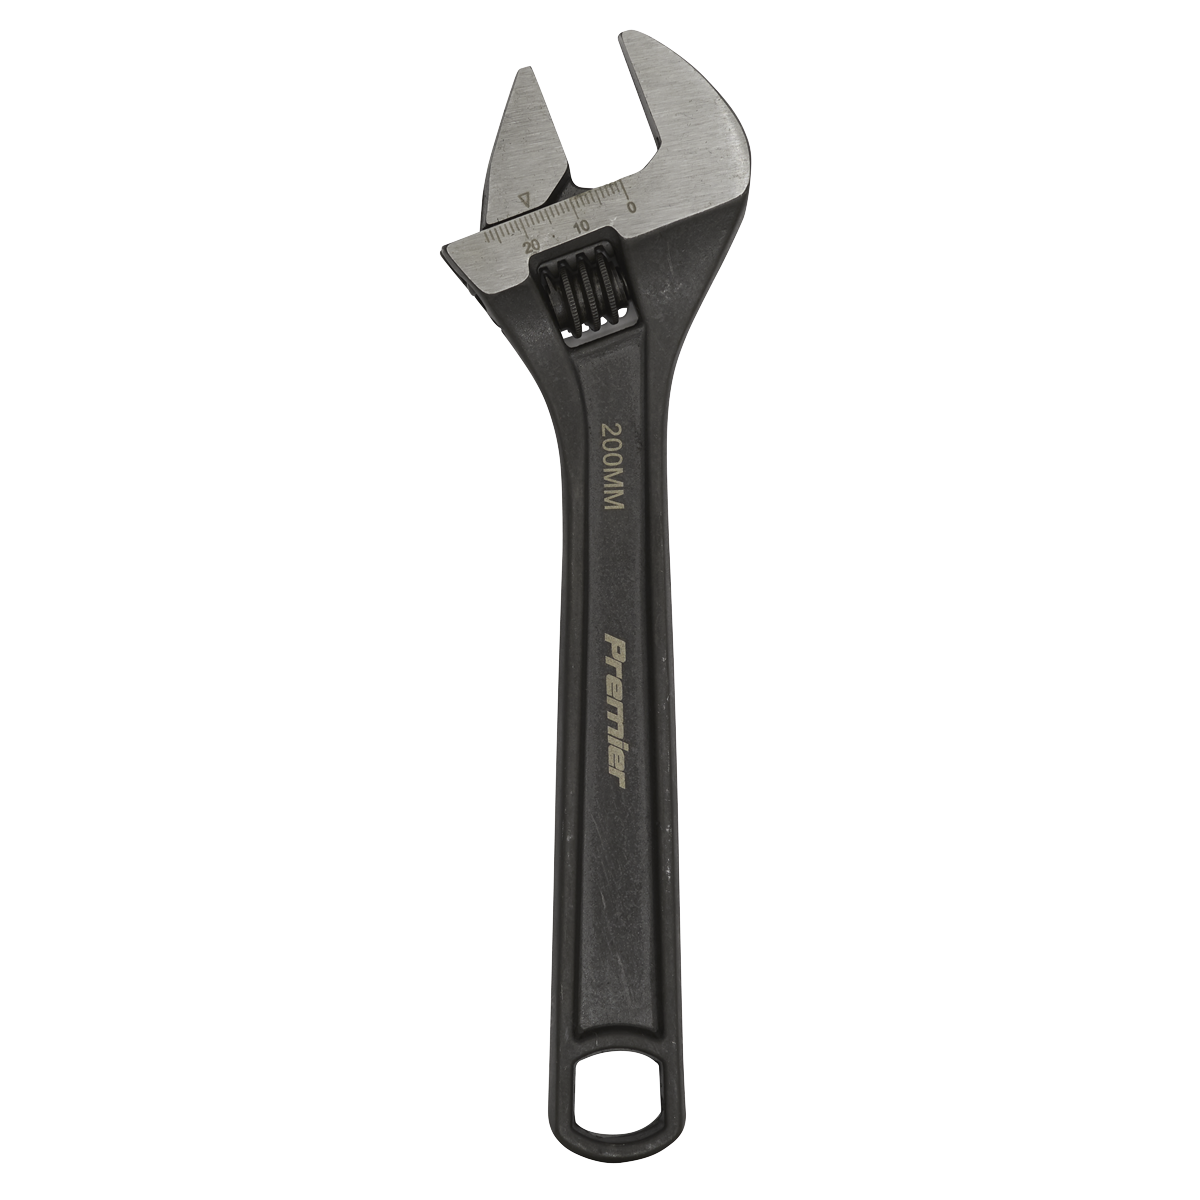 Adjustable Wrench 200mm - AK9561 - Farming Parts